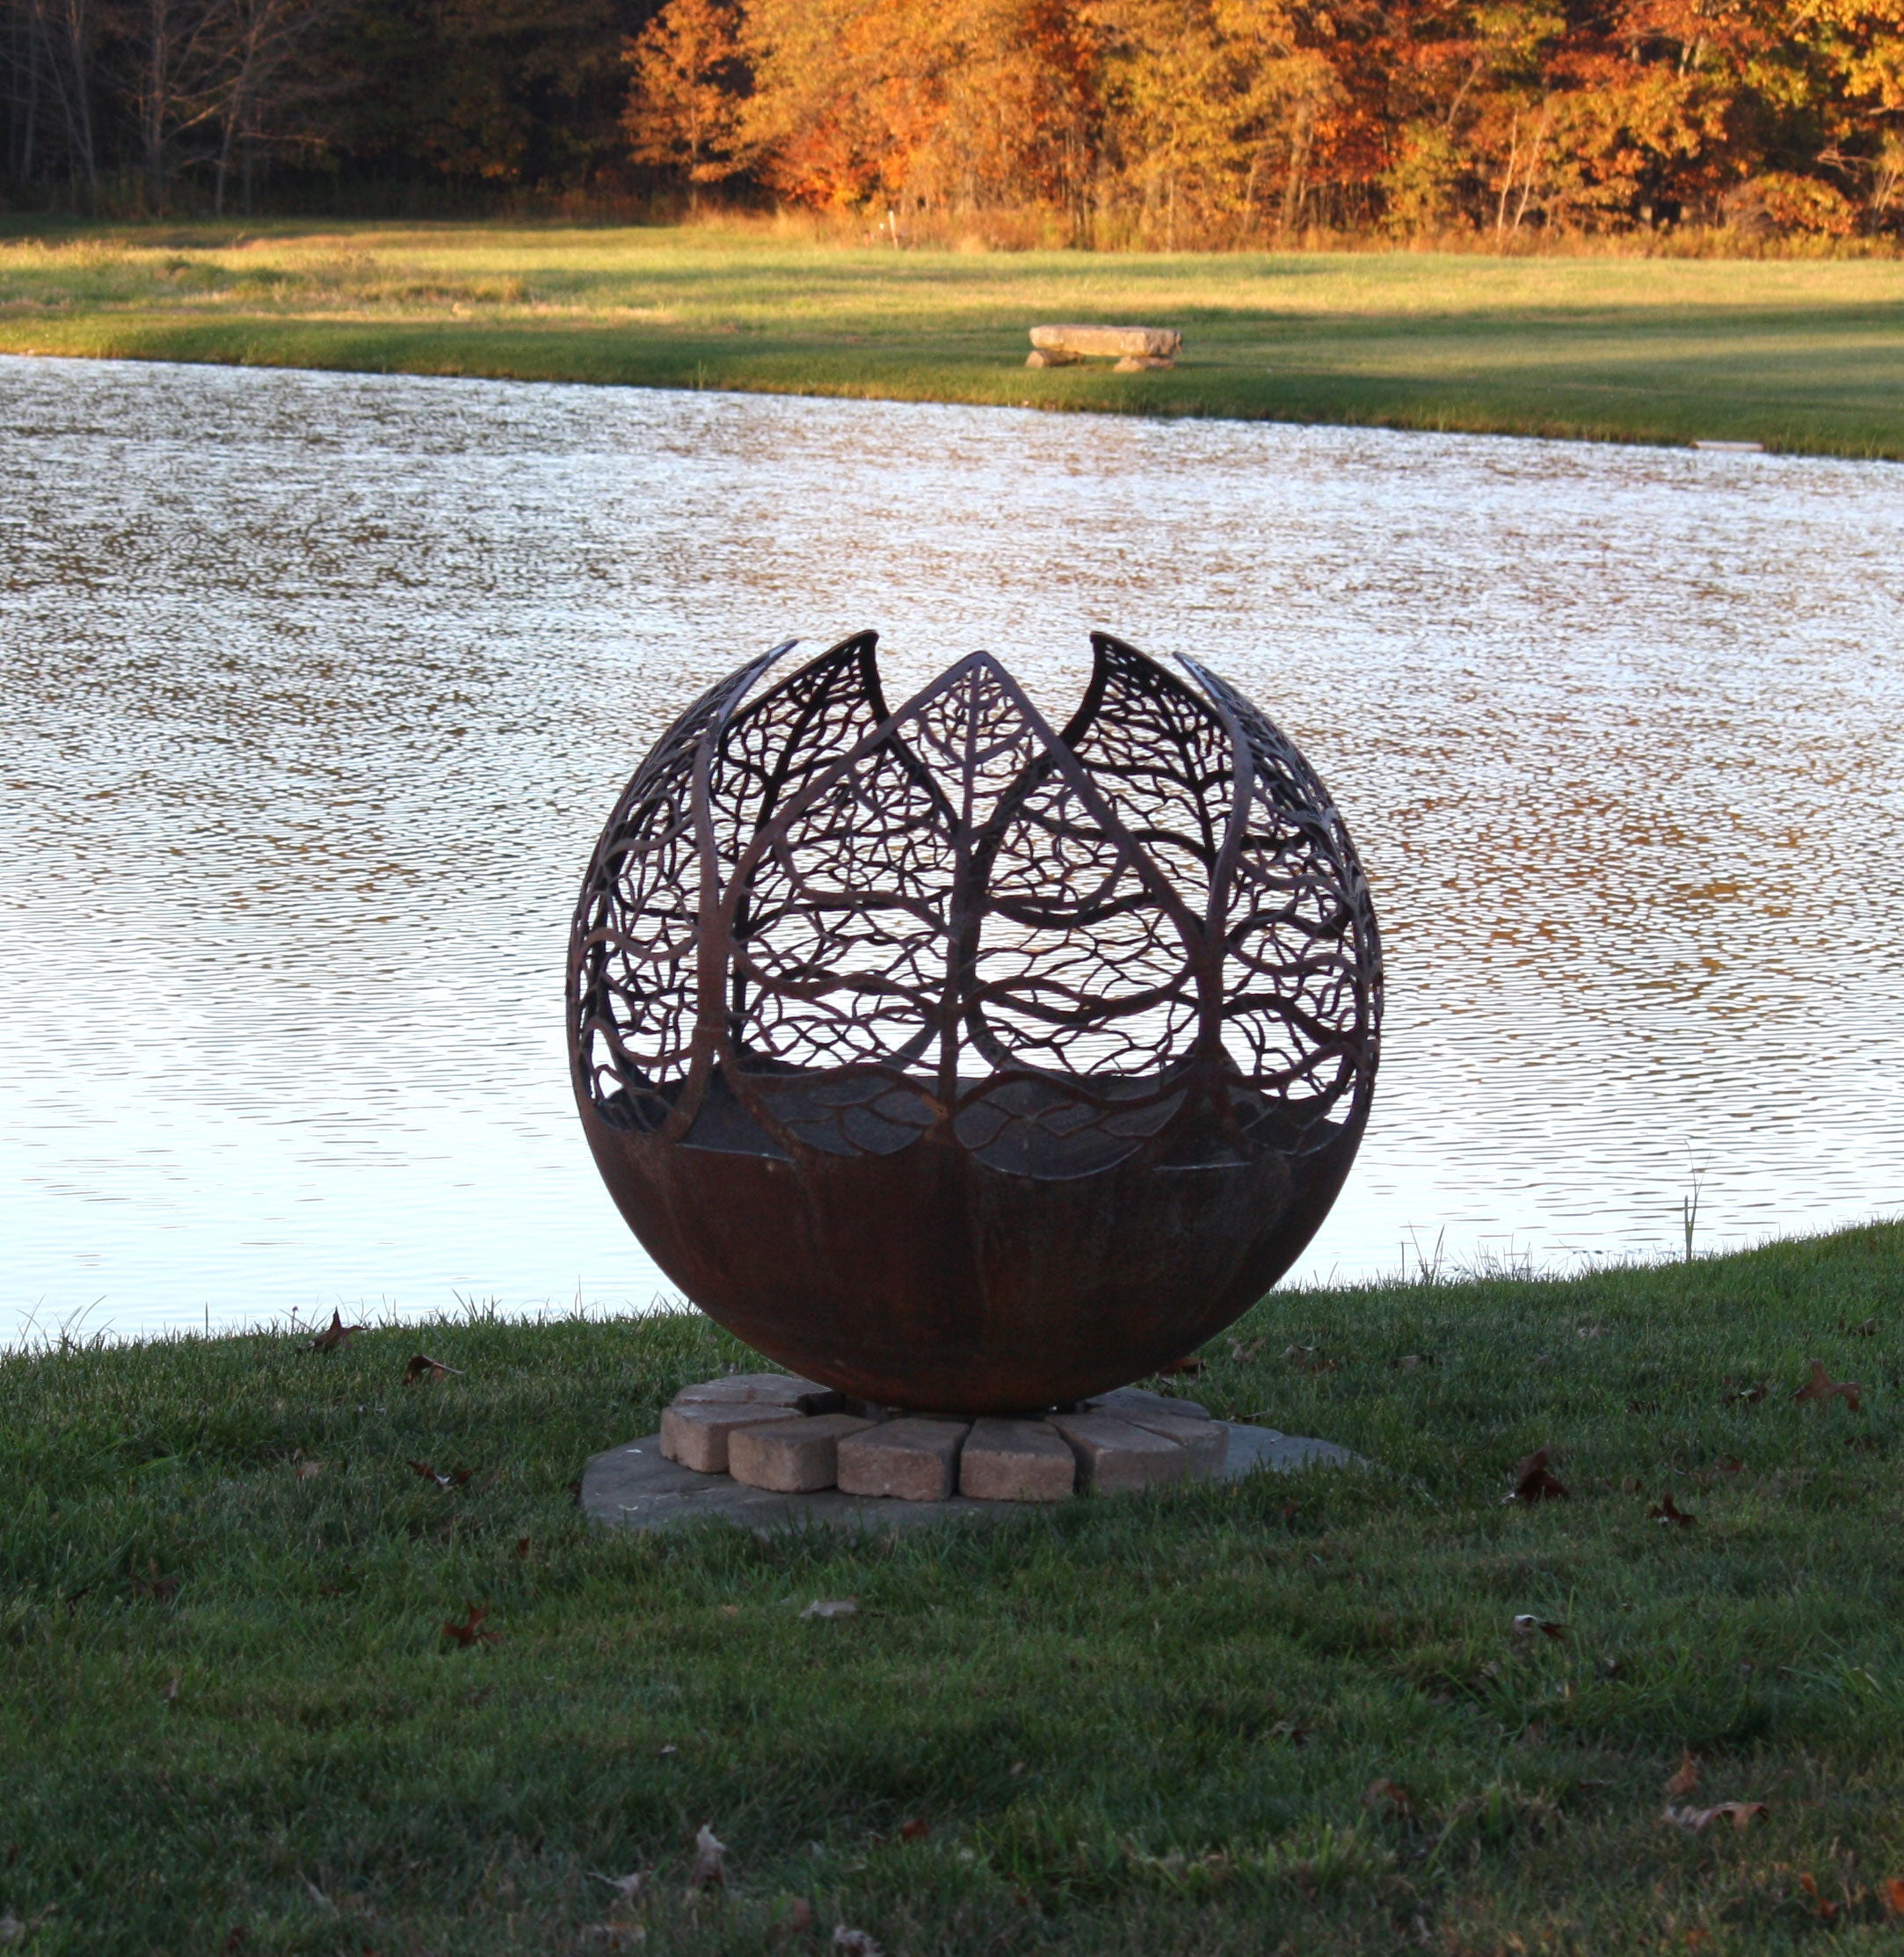 The Fire Pit Gallery Autumn Sunset – Leaf Fire Pit Sphere